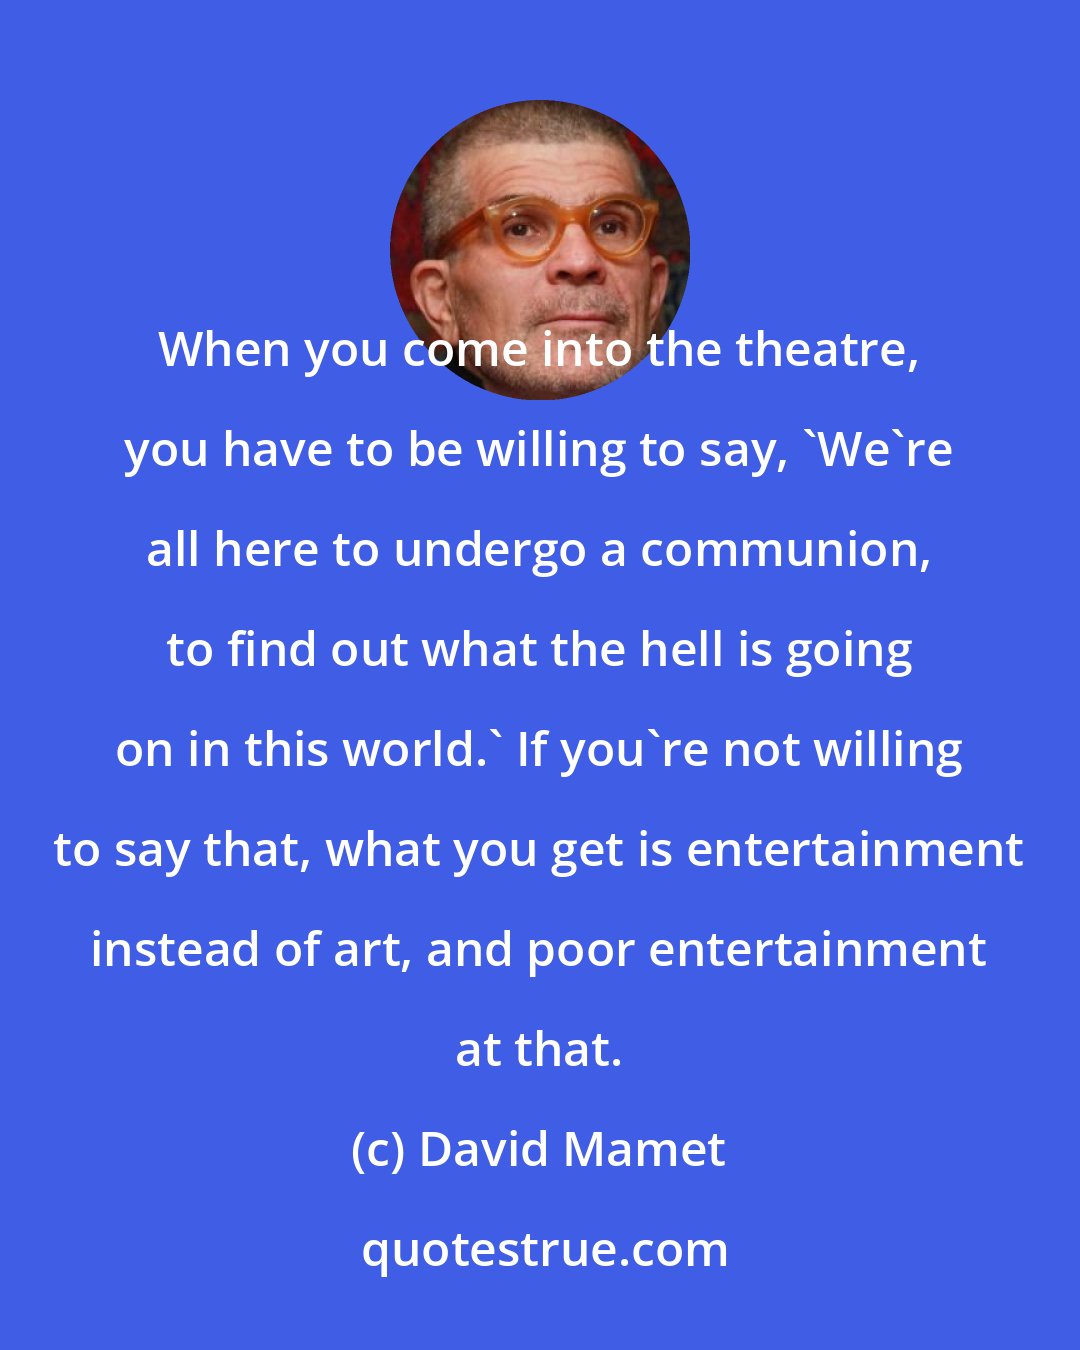 David Mamet: When you come into the theatre, you have to be willing to say, 'We're all here to undergo a communion, to find out what the hell is going on in this world.' If you're not willing to say that, what you get is entertainment instead of art, and poor entertainment at that.